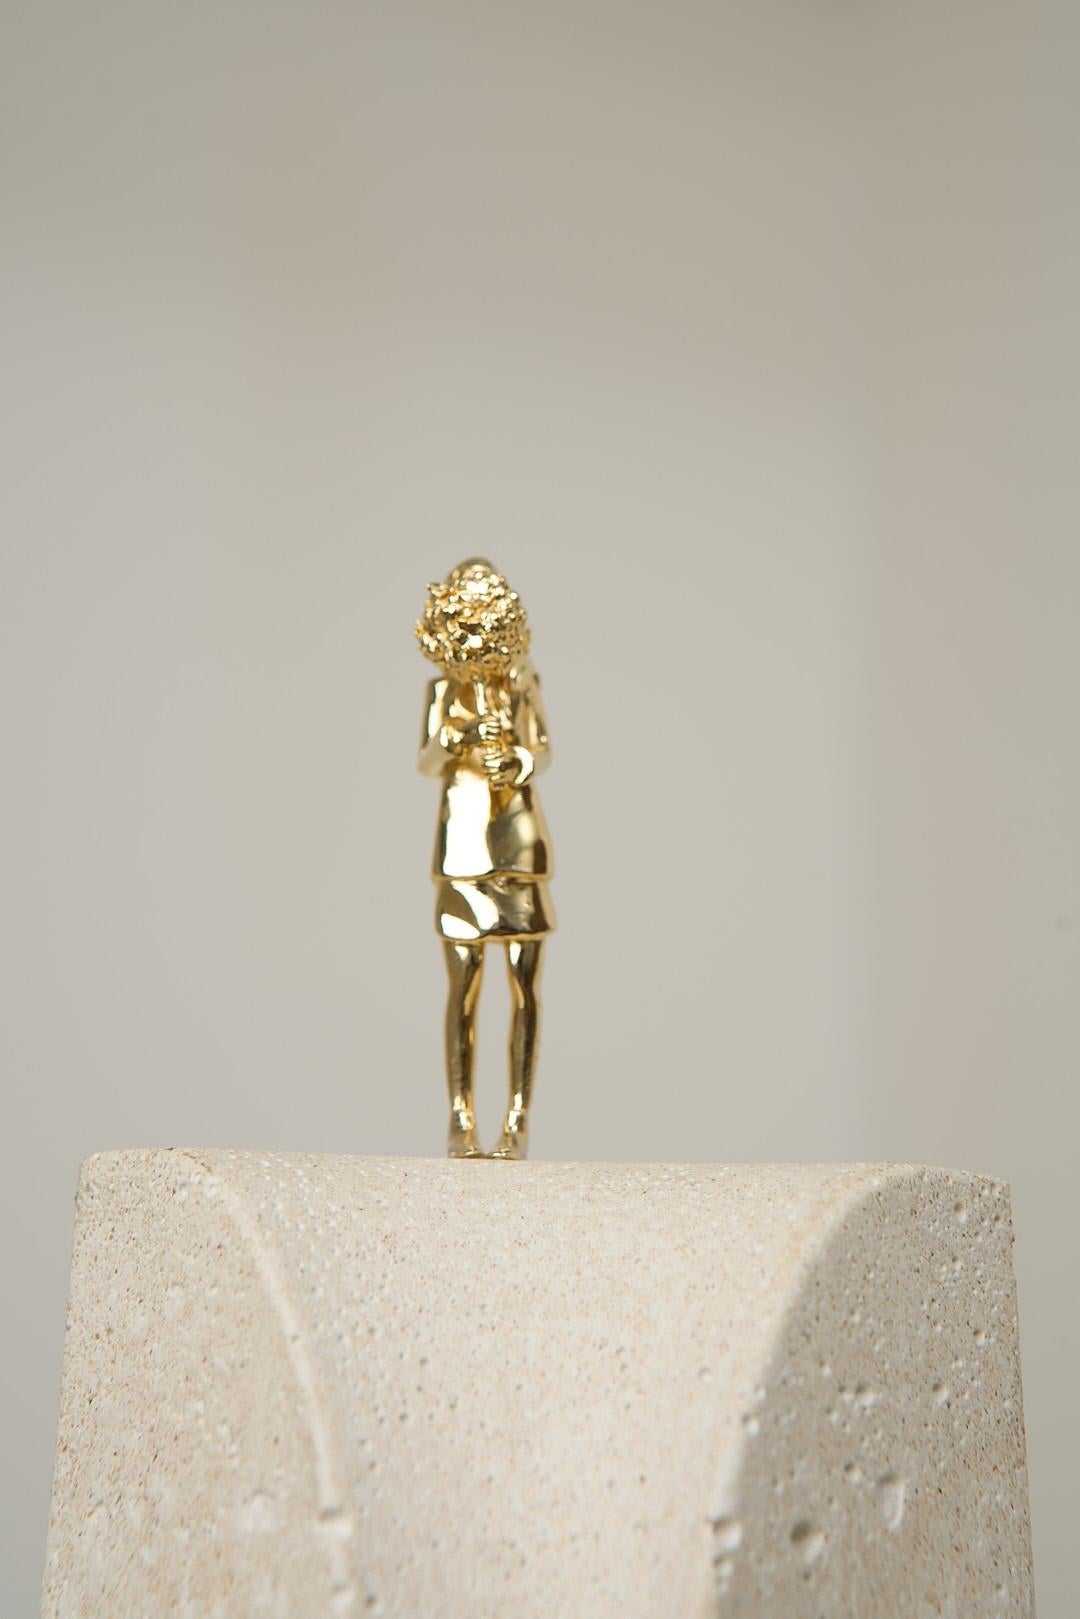 Sinestesia Series, Concrete and Brass Girl Sculpture N3 For Sale 5